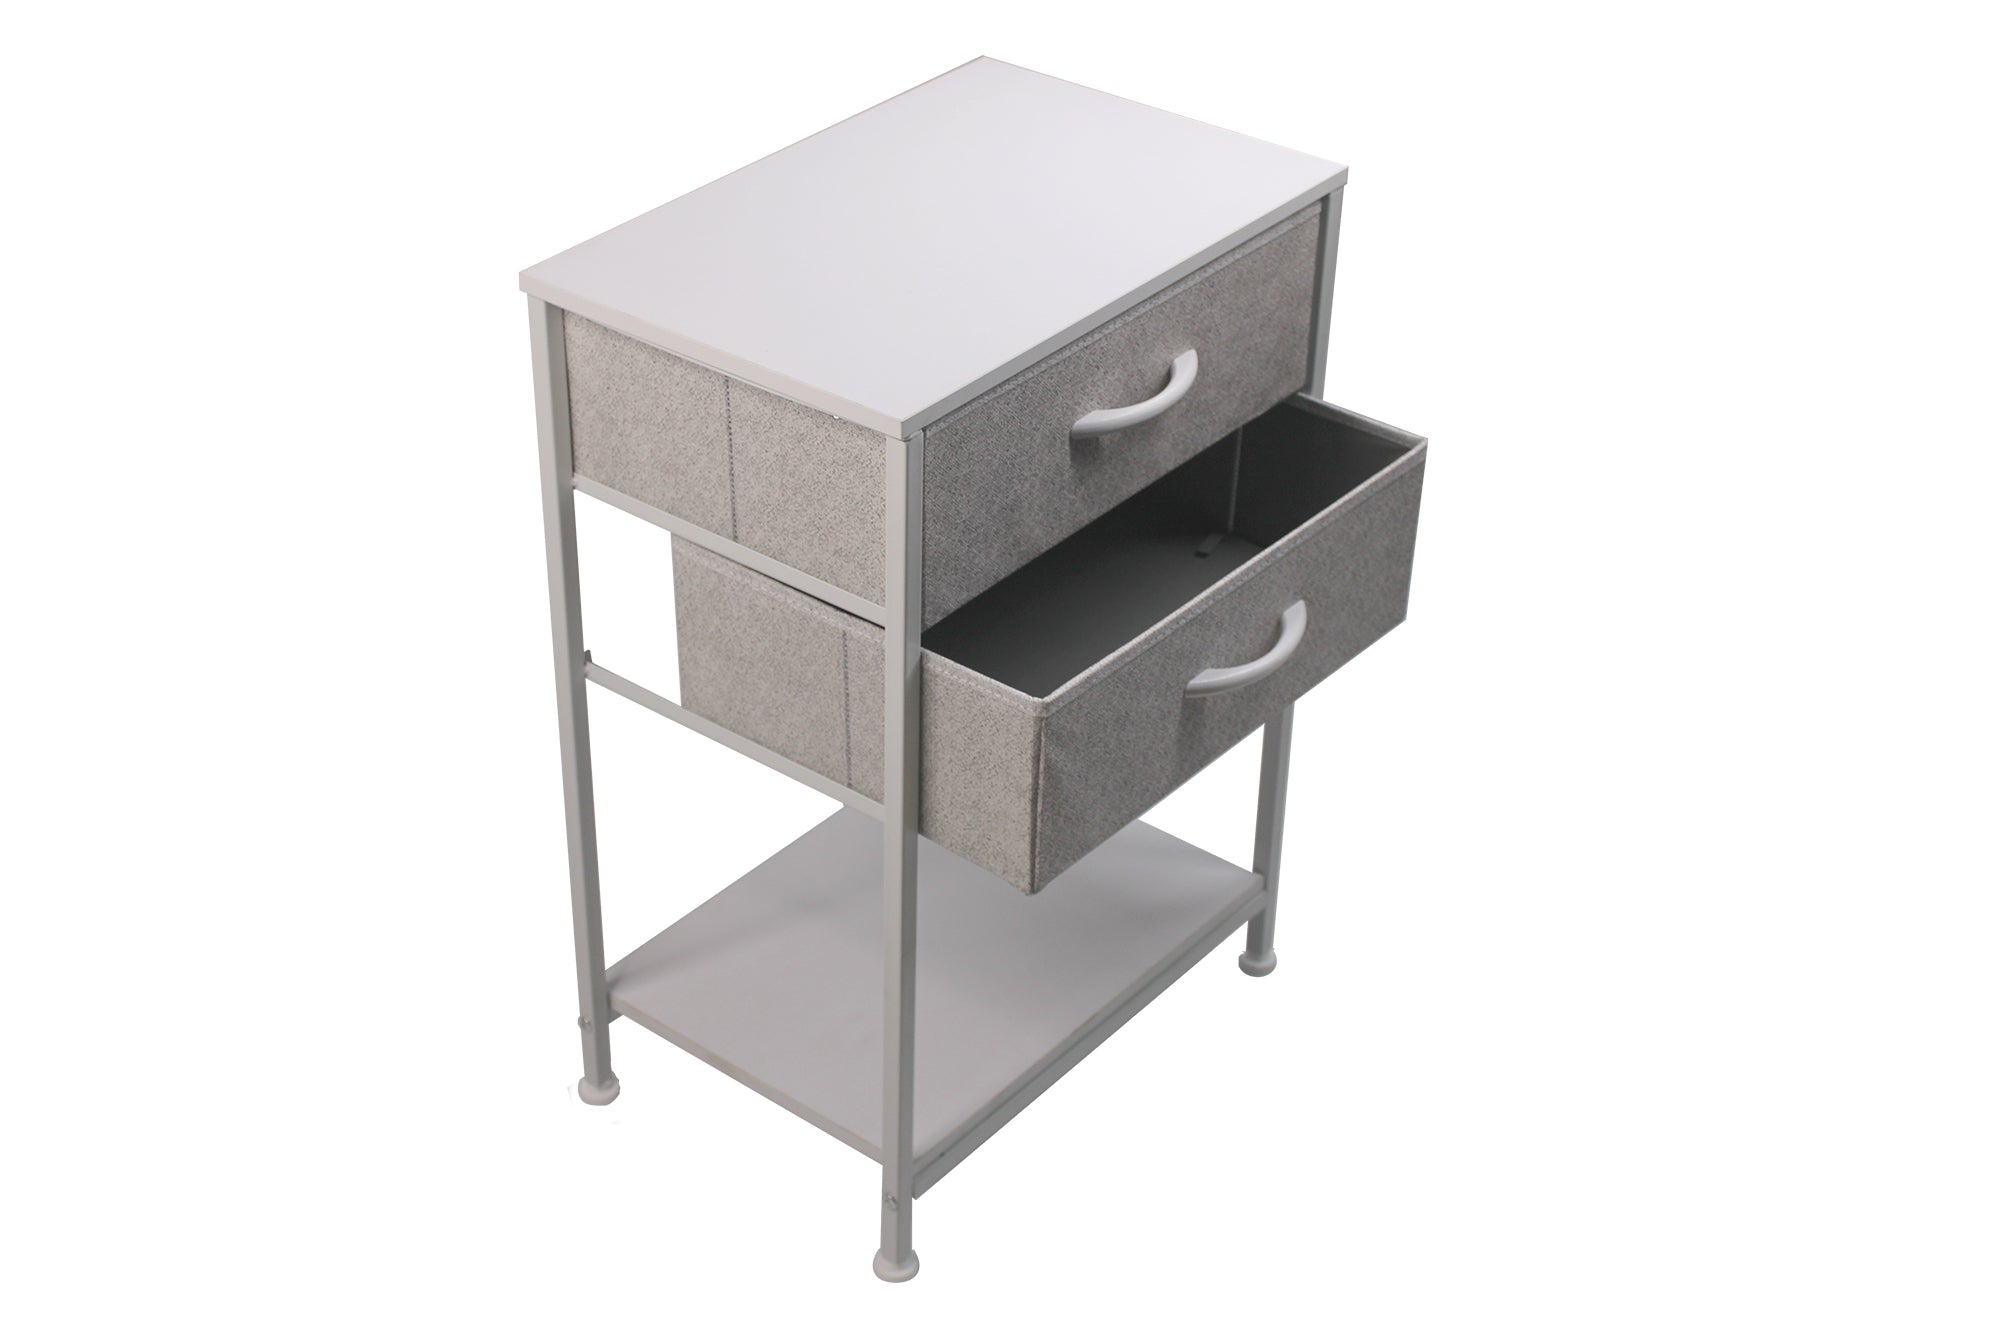 LMA Branded Economical Metal & Fabric - 2 Drawer Bedside Cabinet WHT/GRY